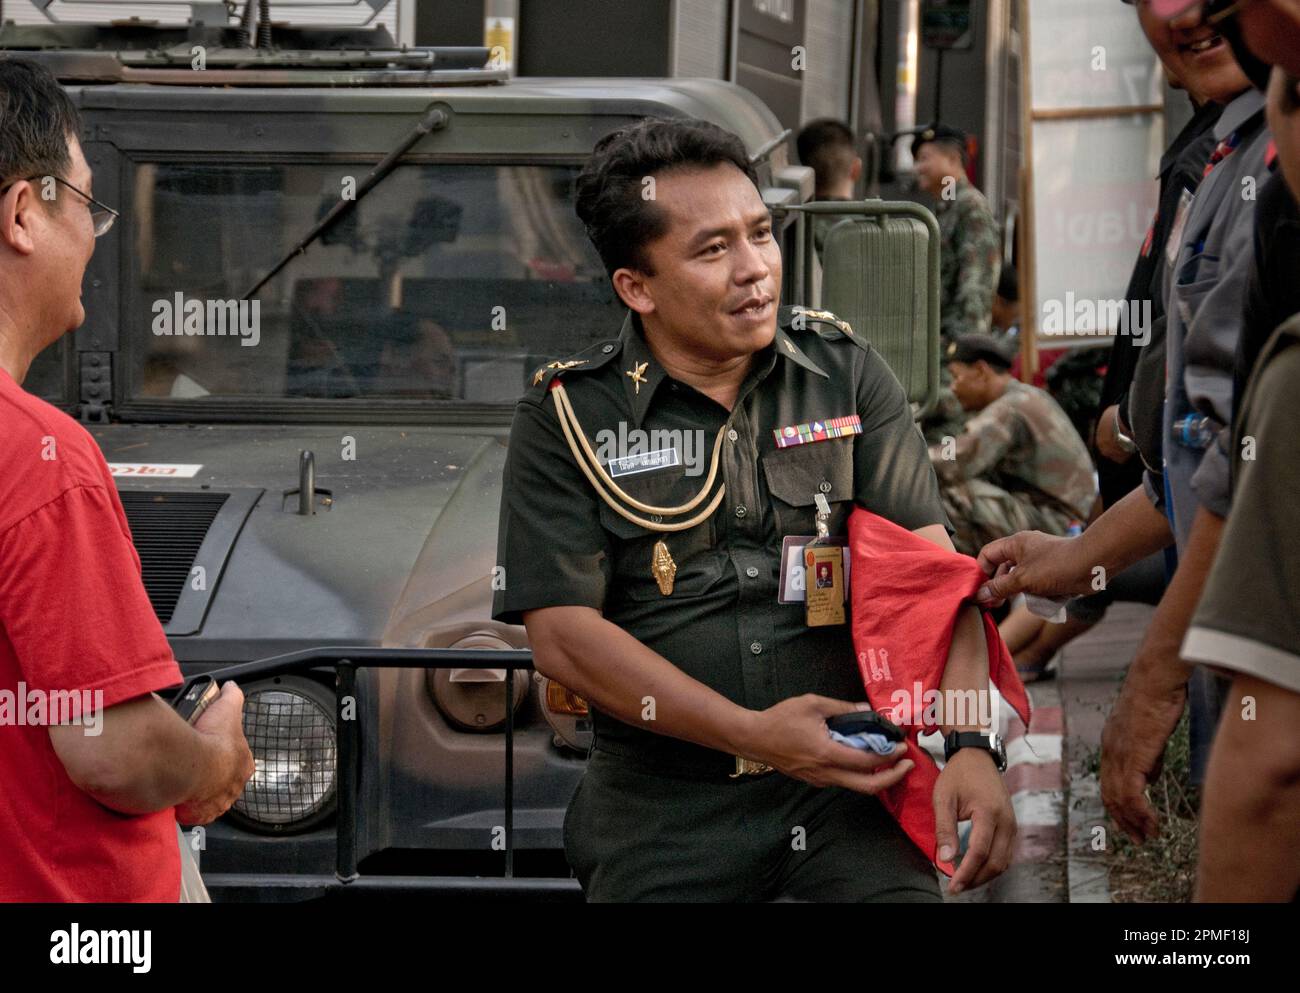 Red shirt protest Truth, Bangkok 2010. While International Media and Corporations with factories in Thailand are accusing the Prime Minister of underestimating the protest and non implementing any response against the 'terrorists”, on the streets, the military forces, the government did sent already, refuse to attack farmers and families, and jeopardised their own tanks, armed with sound waves.Bangkok chief Police, Coronel Sed Daeng and Red March leaders stand together against violence. Days later, Coronel Sed Daeng was shot in the head by a sniper, as predicted in our exclusive interview. Stock Photo